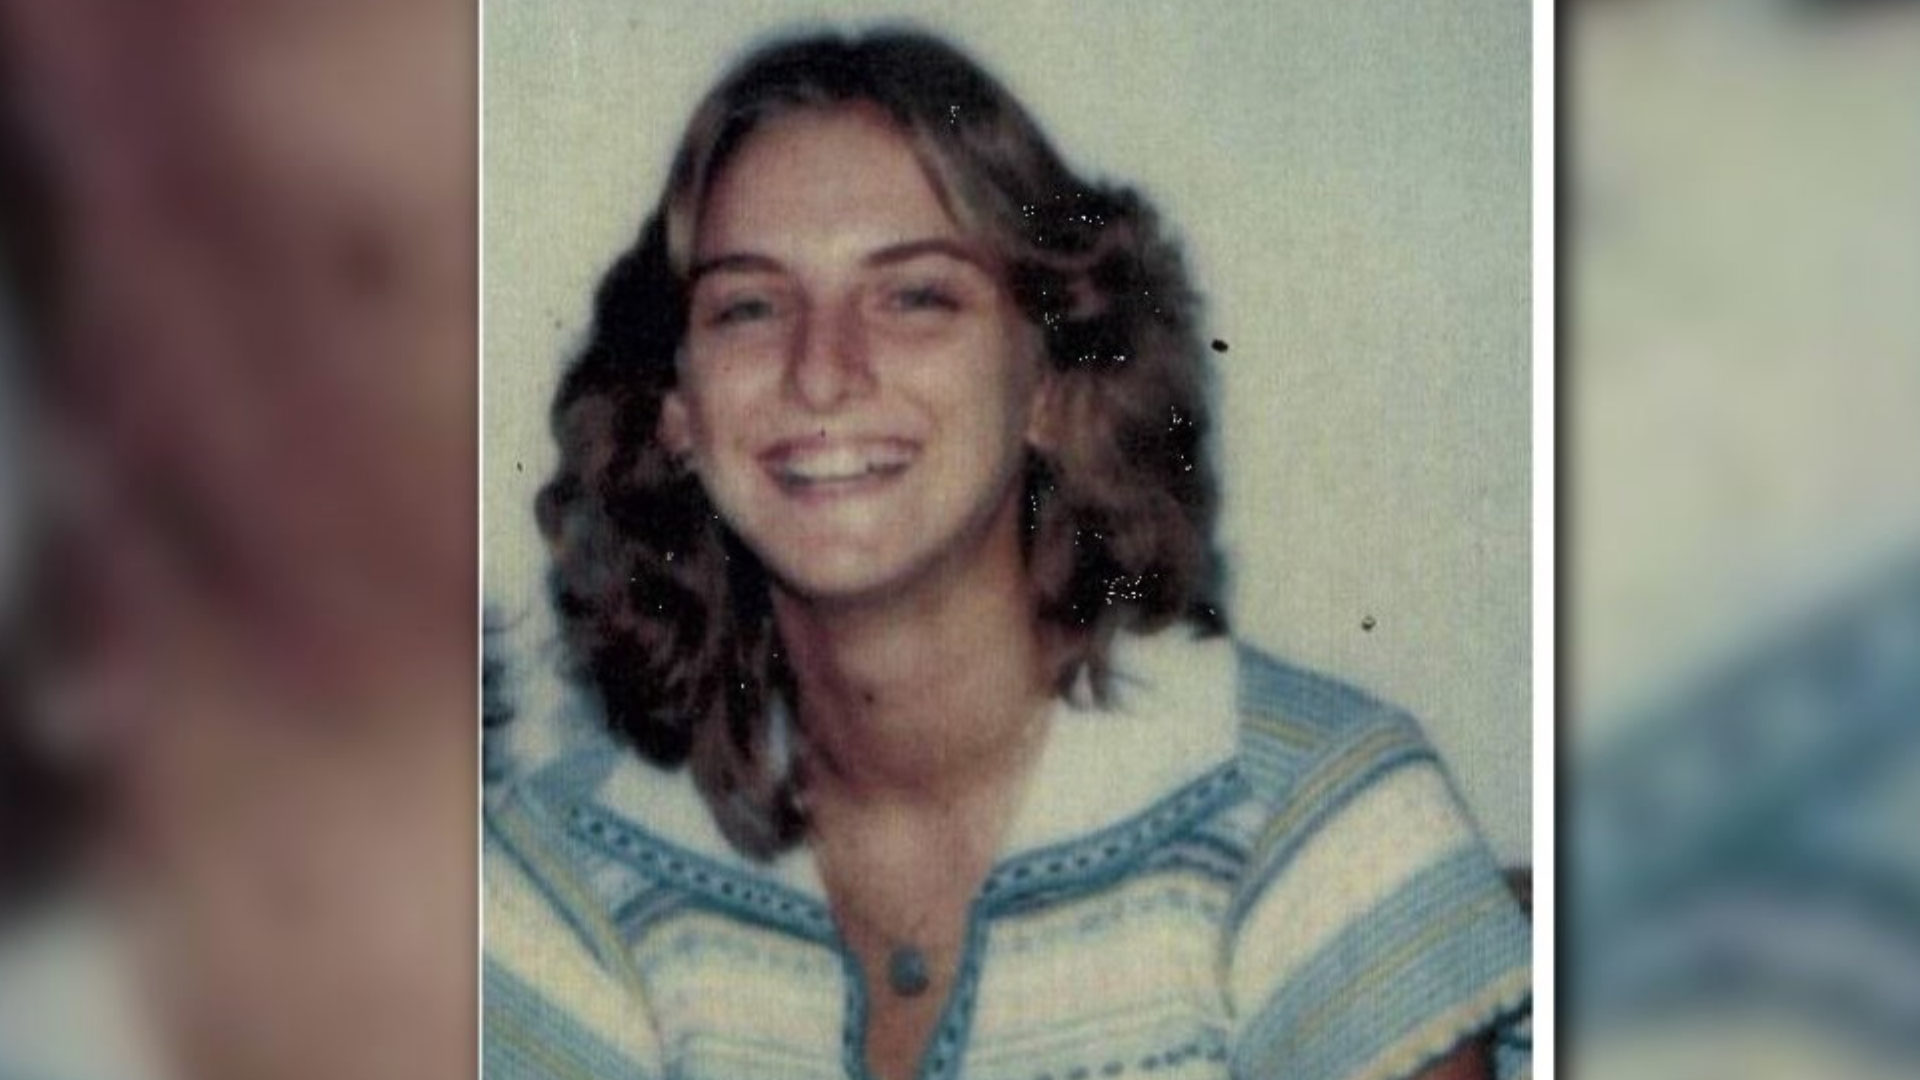 Robin Brooks, 20, was found stabbed to death and sexually assaulted in her apartment back in 1980. Now, police believe they have found her killer.